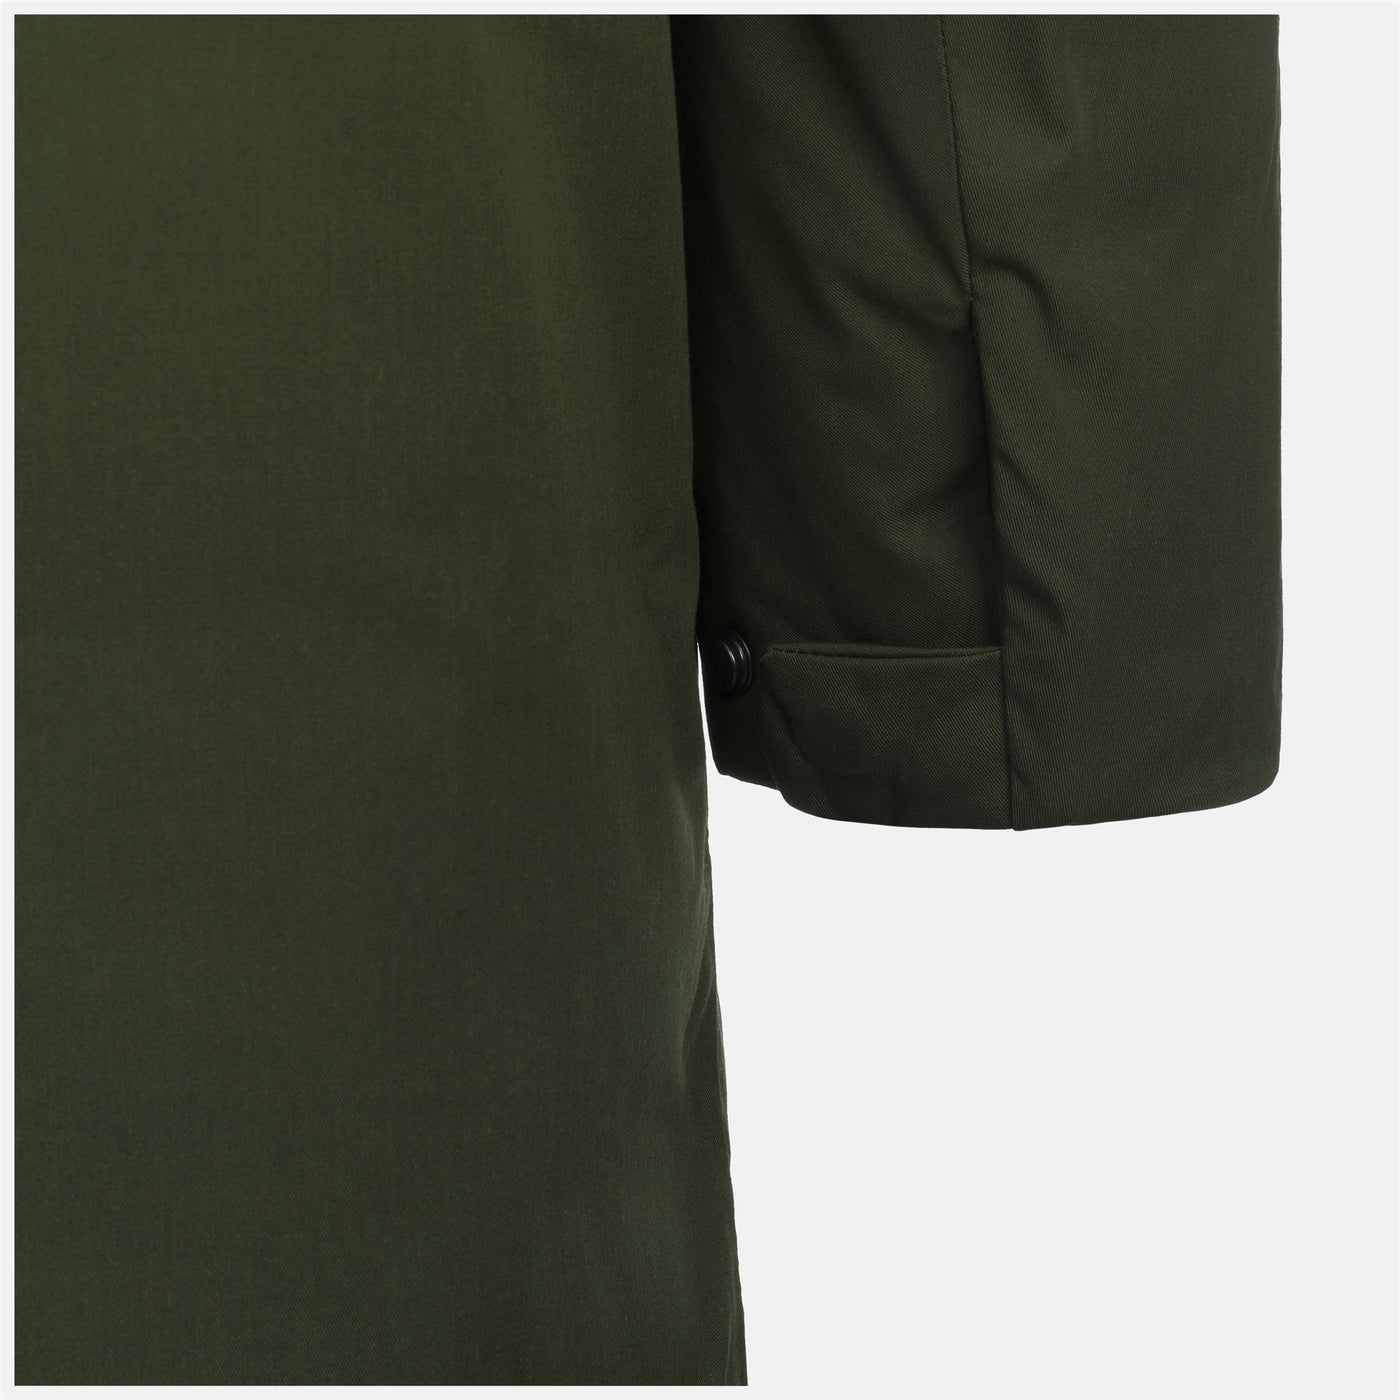 Jackets Man JEREMY THERMO COTTON 3/4 Length GREEN AFRICA Dressed Front (jpg Rgb)	